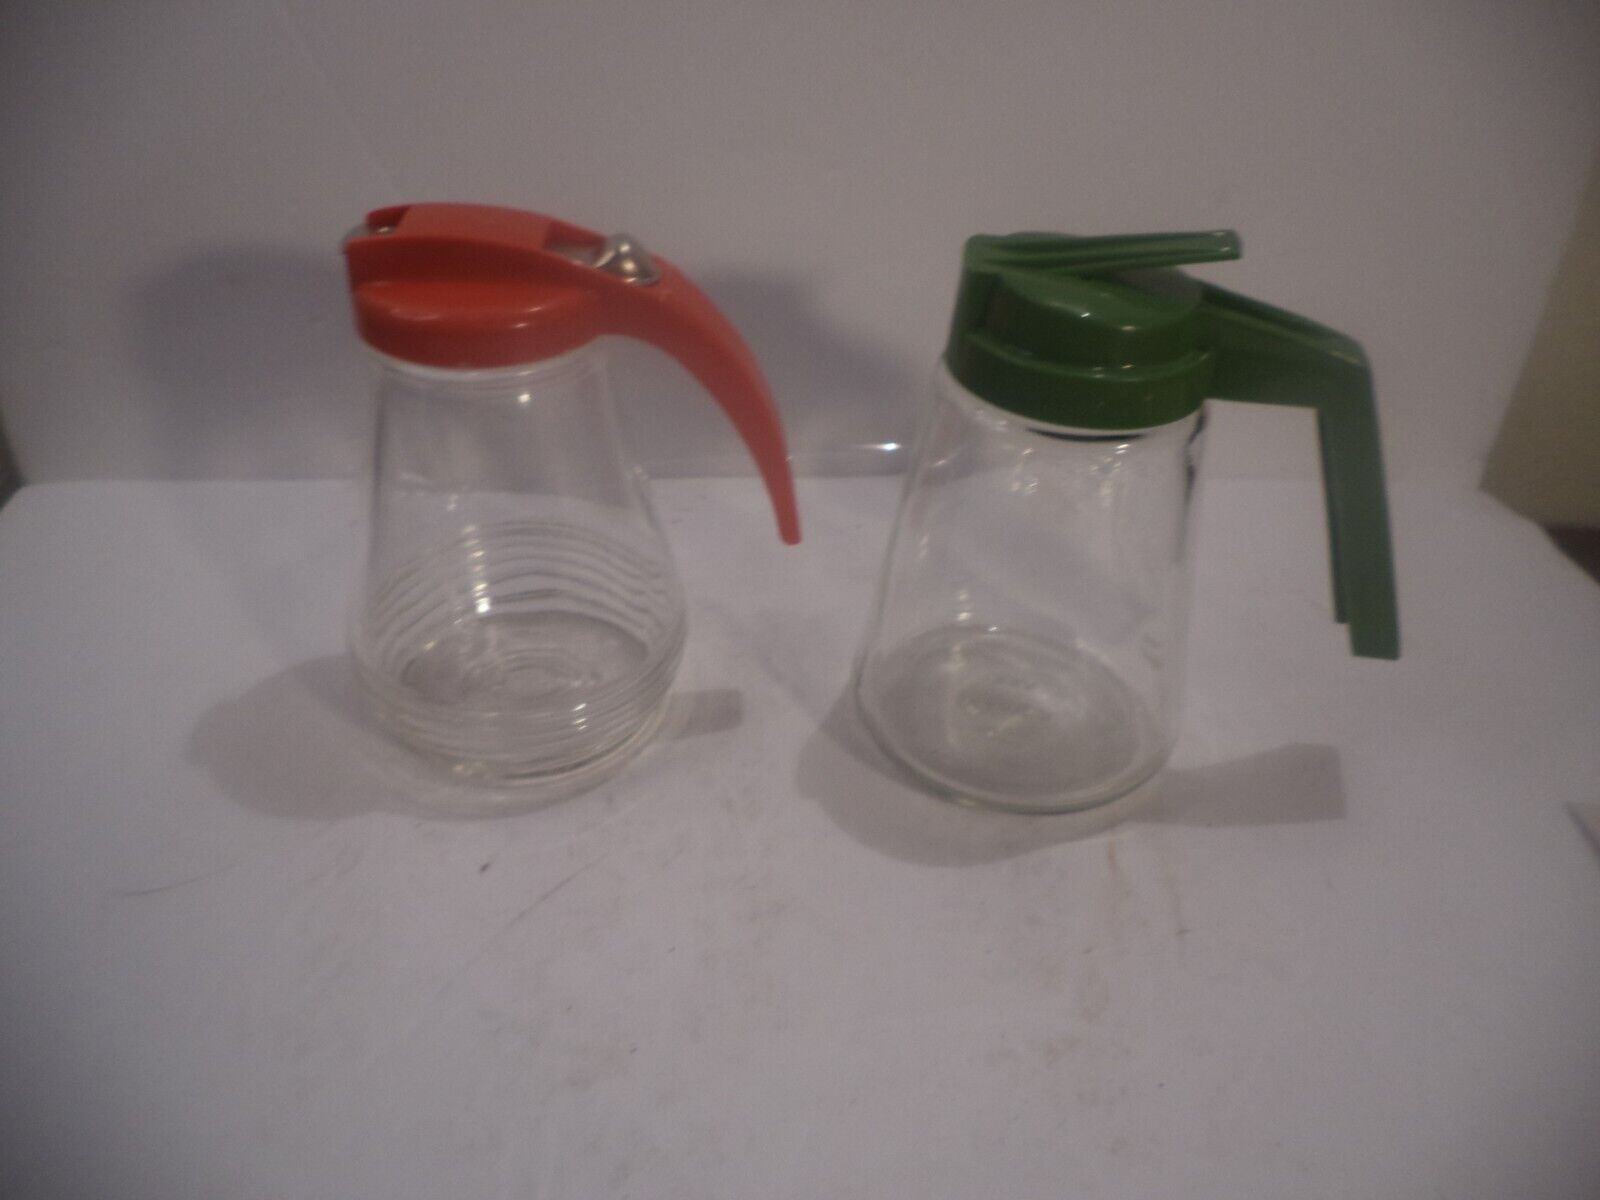 GEMCO  Green Top & Red Top Glass Syrup Dispensers Jars Breakfast Pancakes Vintag